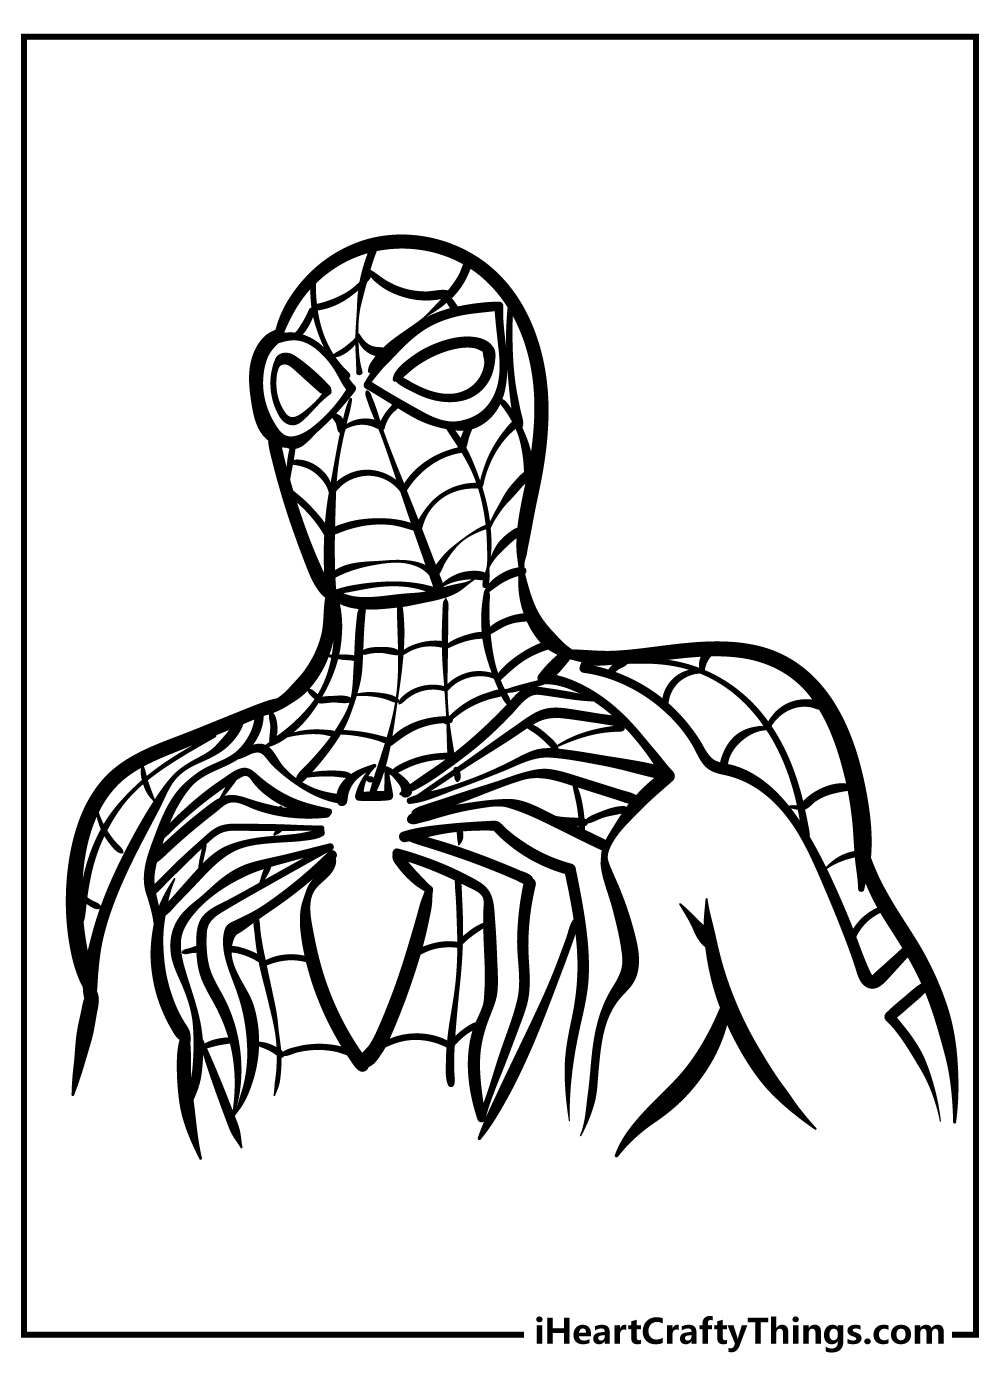 Printable Spider Man Coloring Pages Updated 20